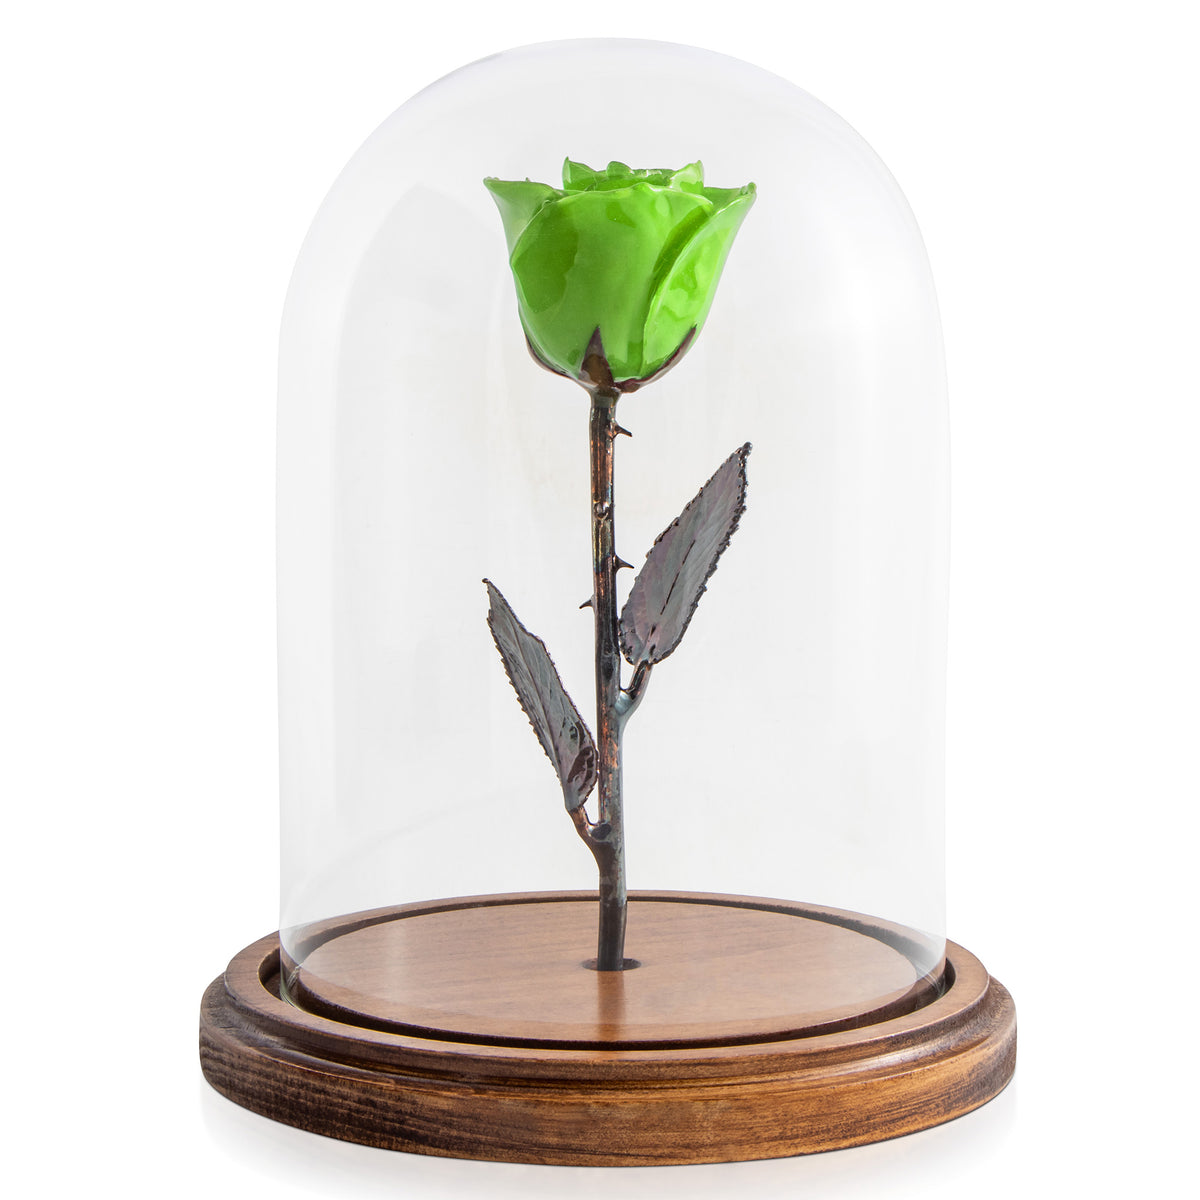 Green Enchanted Rose (aka Beauty &amp; The Beast Rose) with Patina Copper Stem Mounted to A Hand Turned Solid Wood Base under a glass dome.